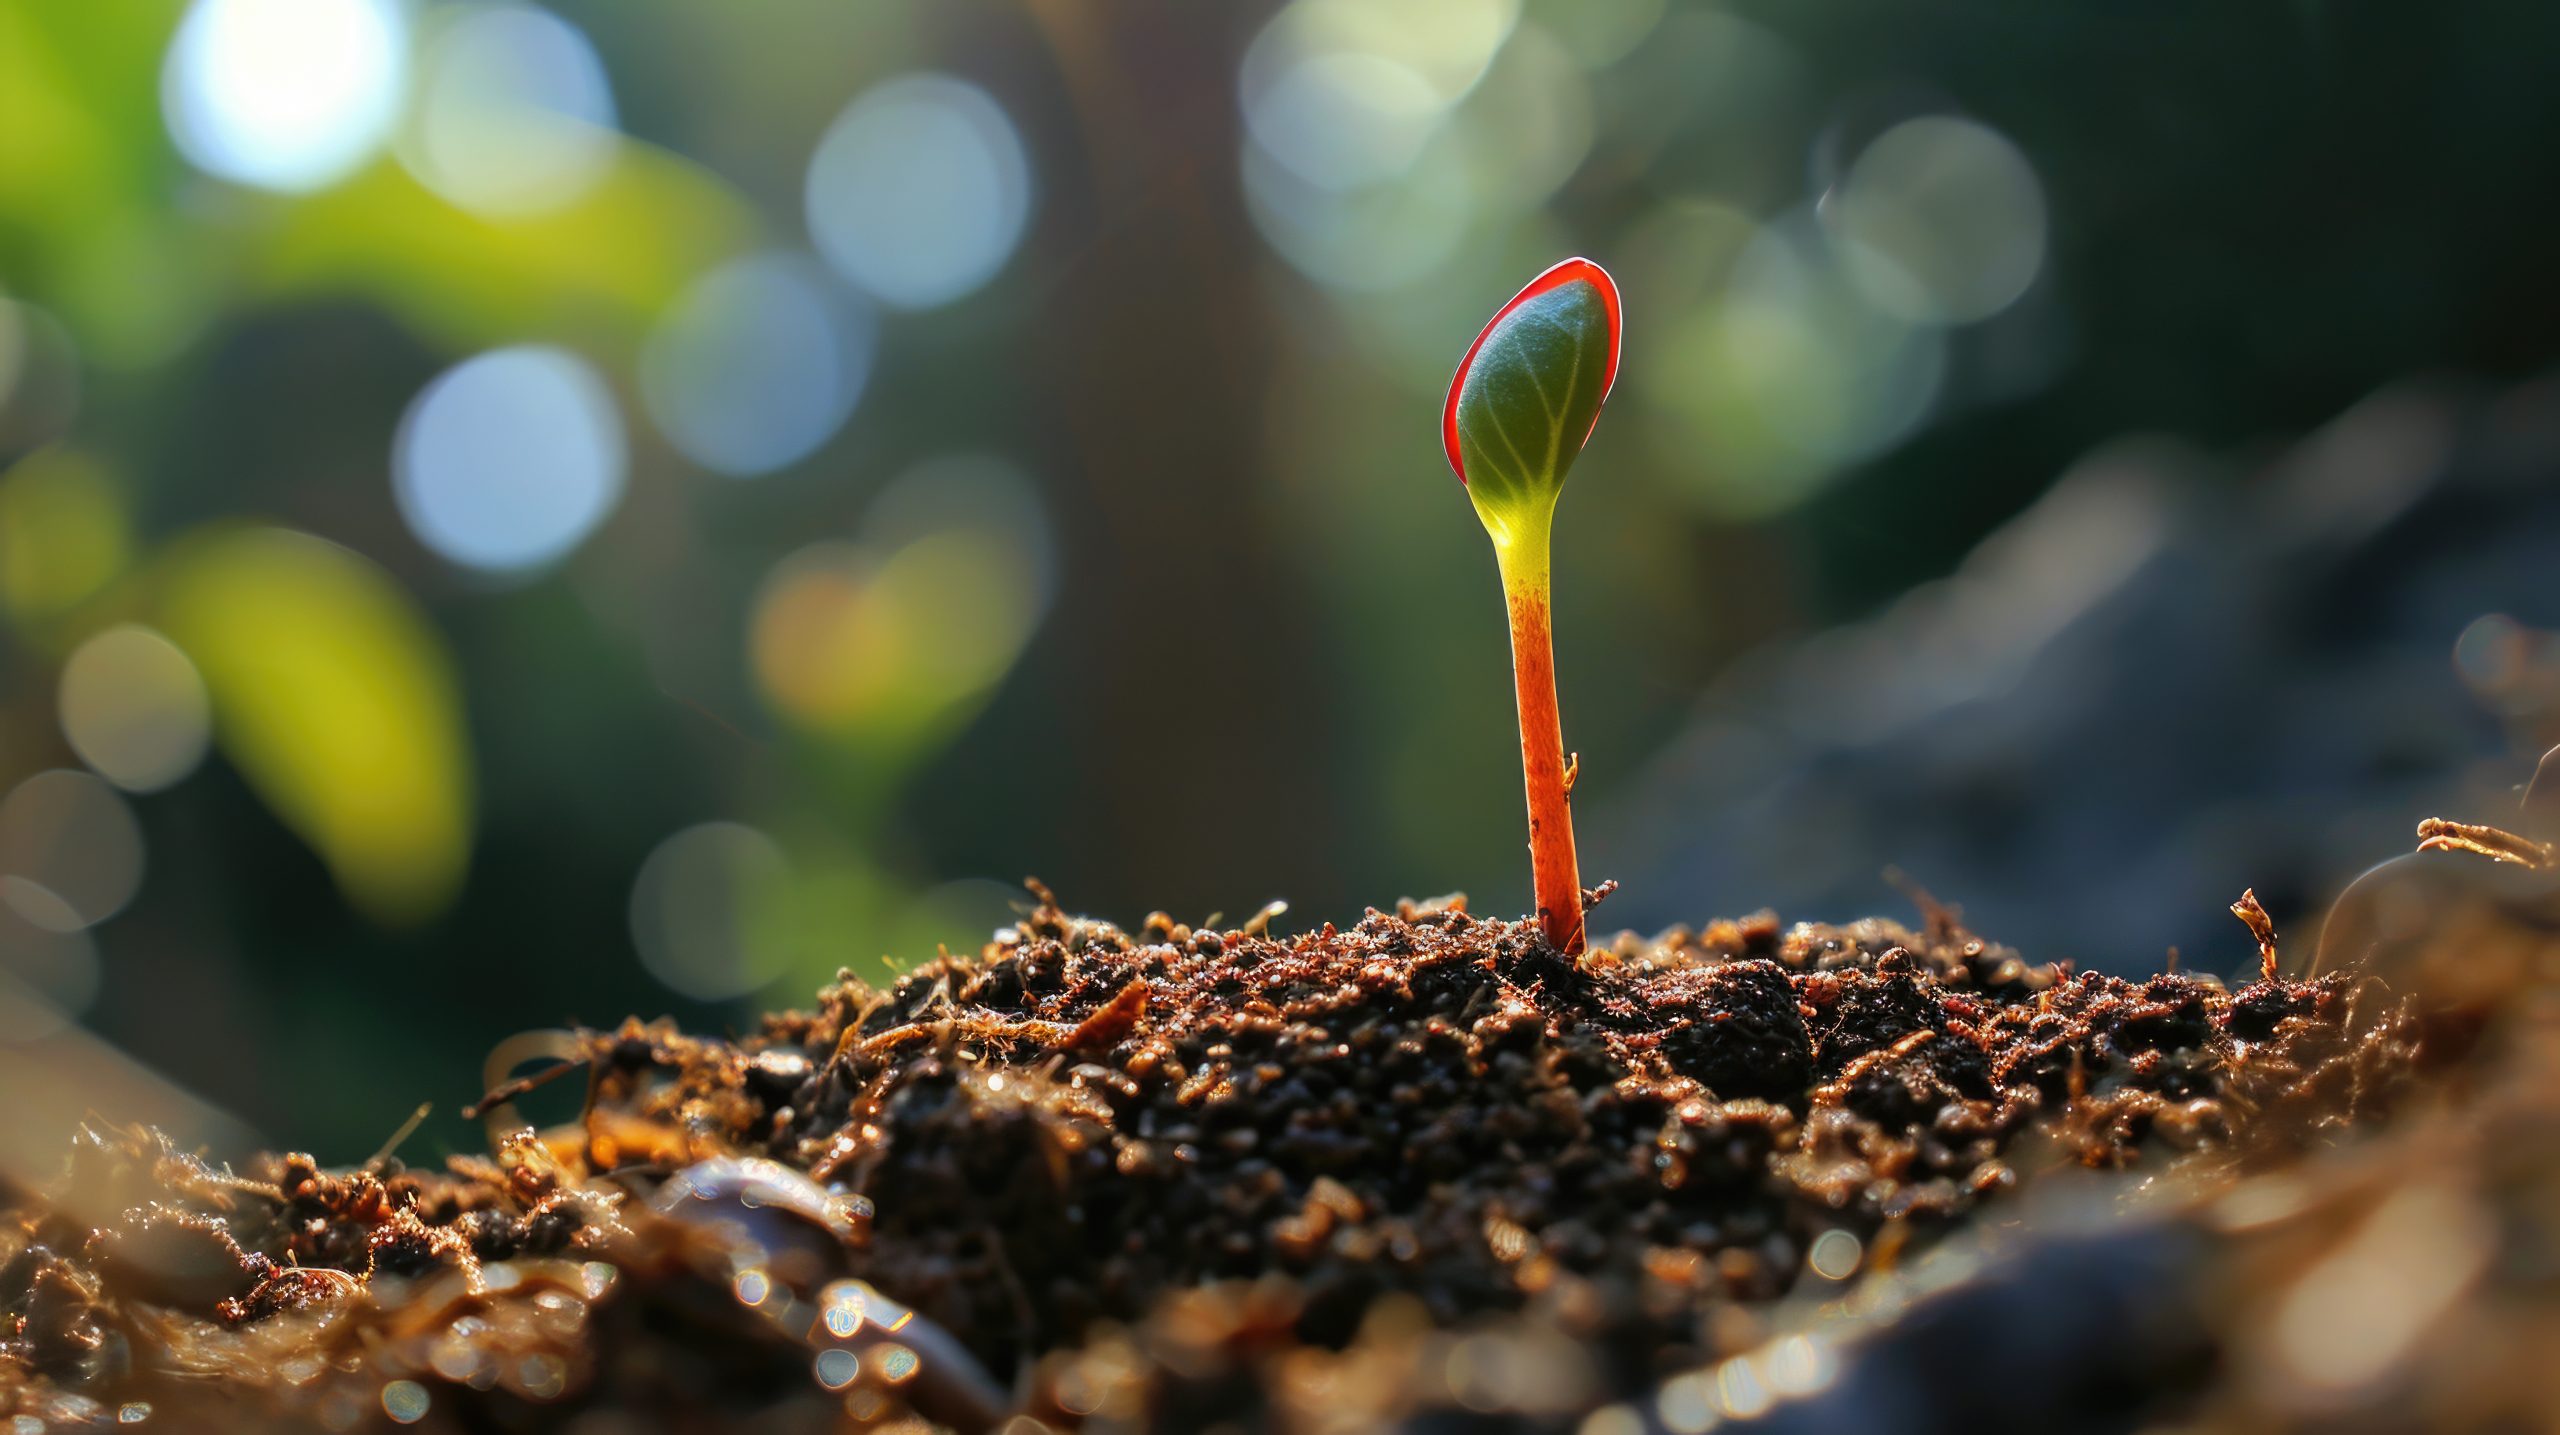 Small plant is sprouting out of pile of dirt. This image can be used to represent growth, new beginnings, or concept of starting from scratch.